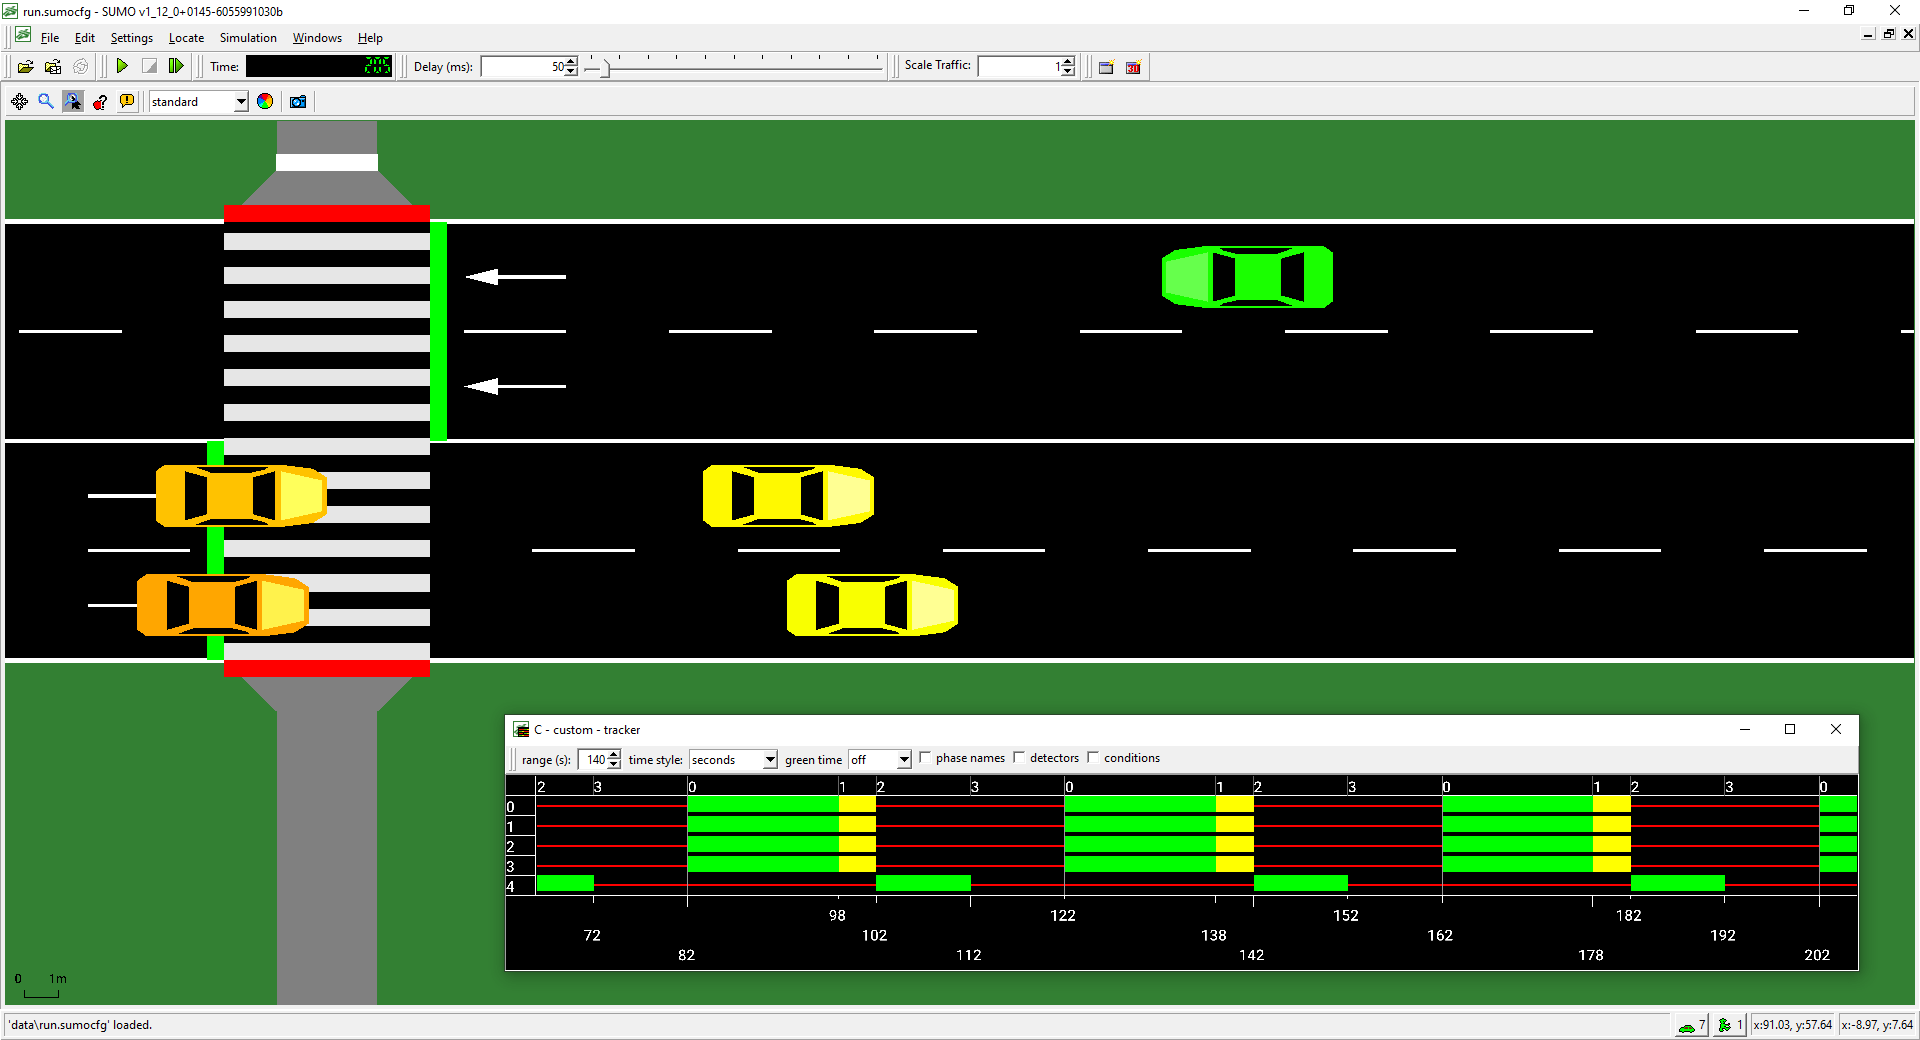 Eclipse Sumo Simulation Of Urban Mobility